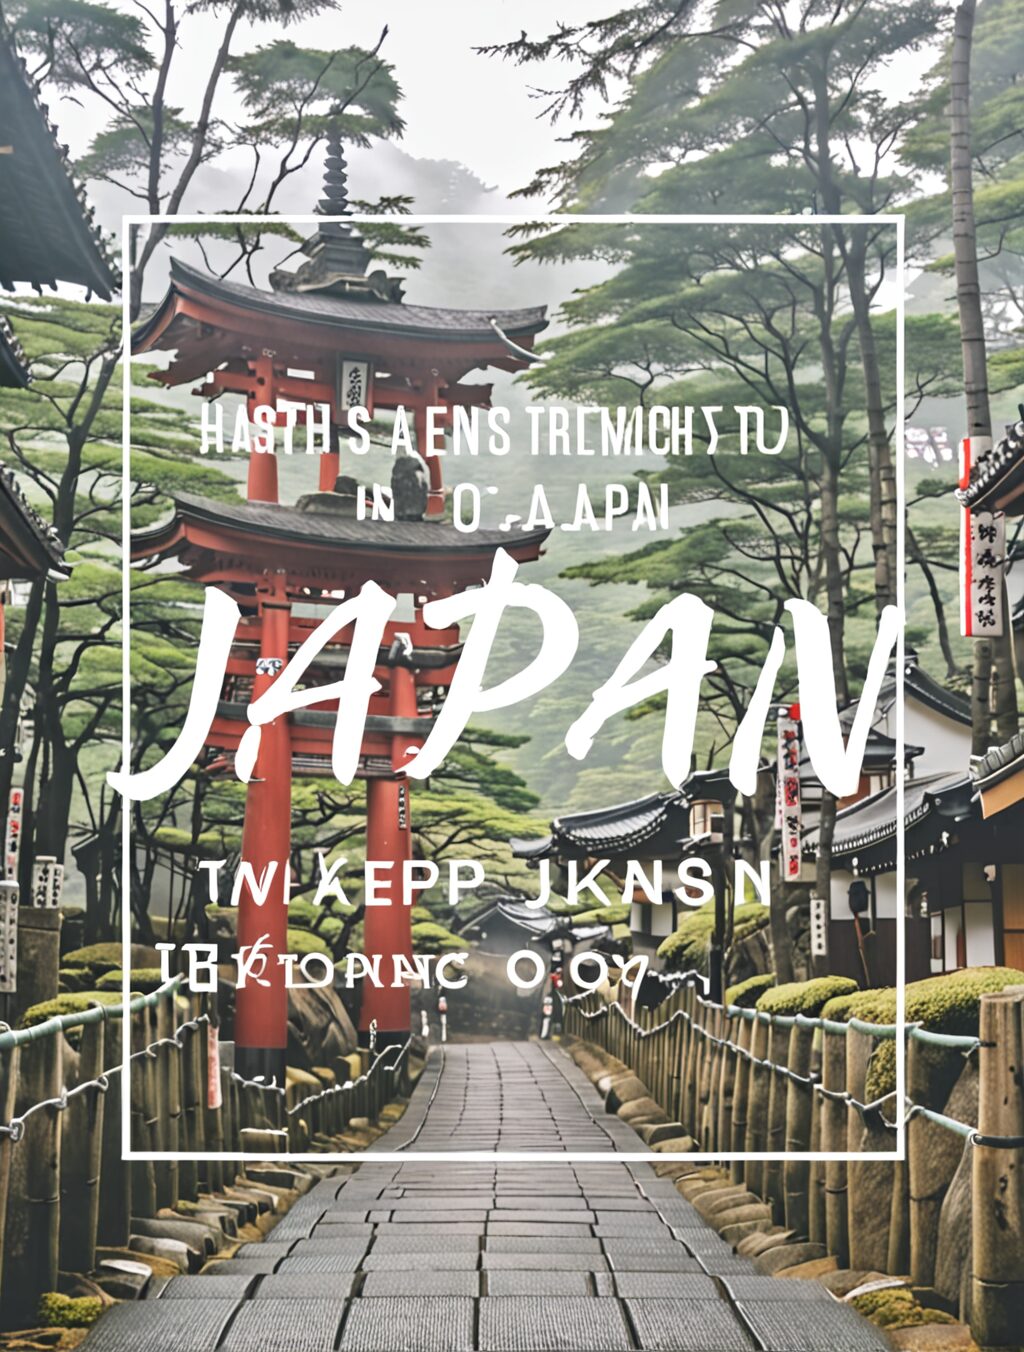 how to plan a trip to japan on your own